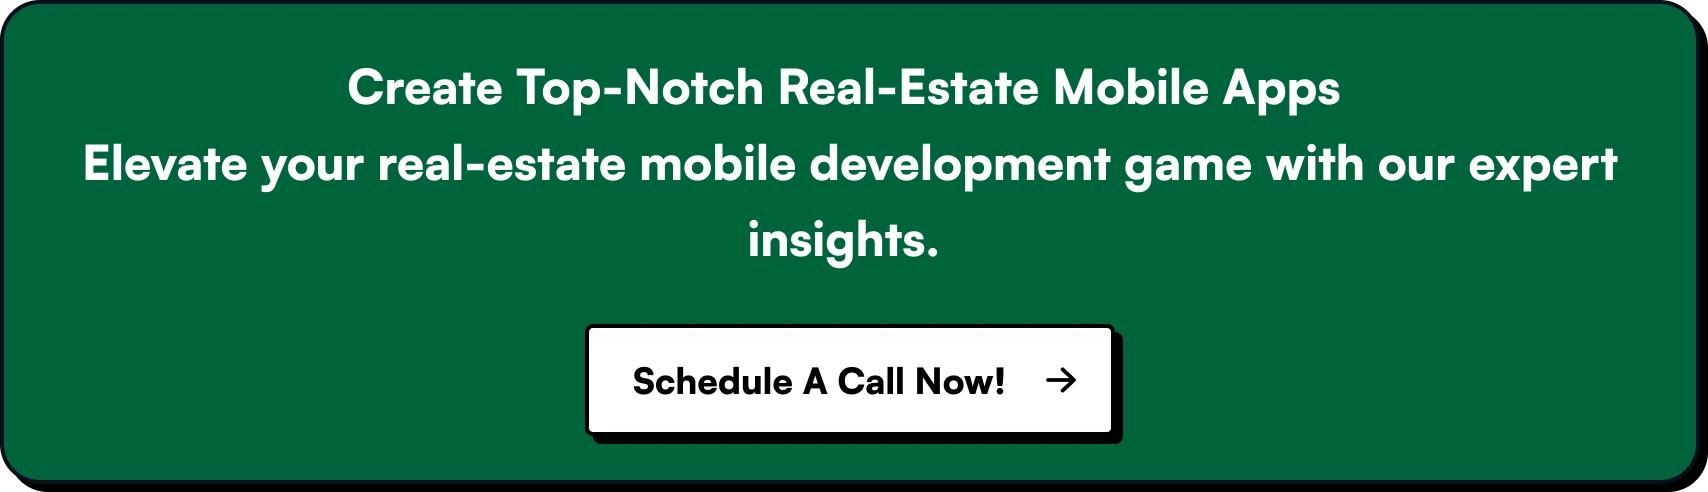 Create Top-Notch Real-Estate Mobile Apps Elevate your real-estate mobile development game with our expert insights